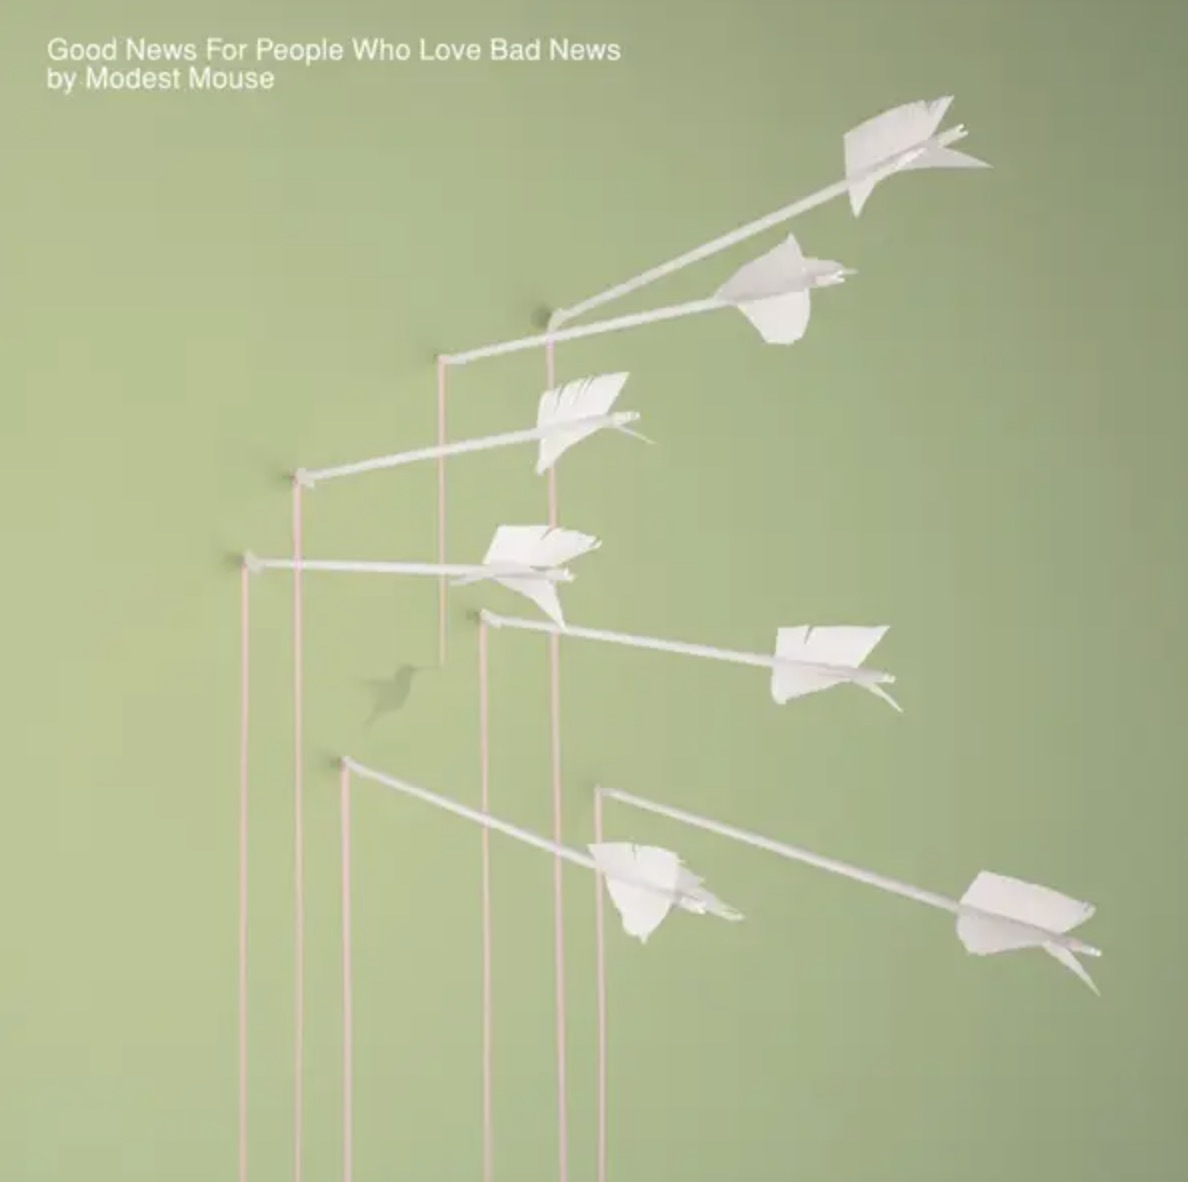 Good News for People Who Love Bad News|Modest Mouse